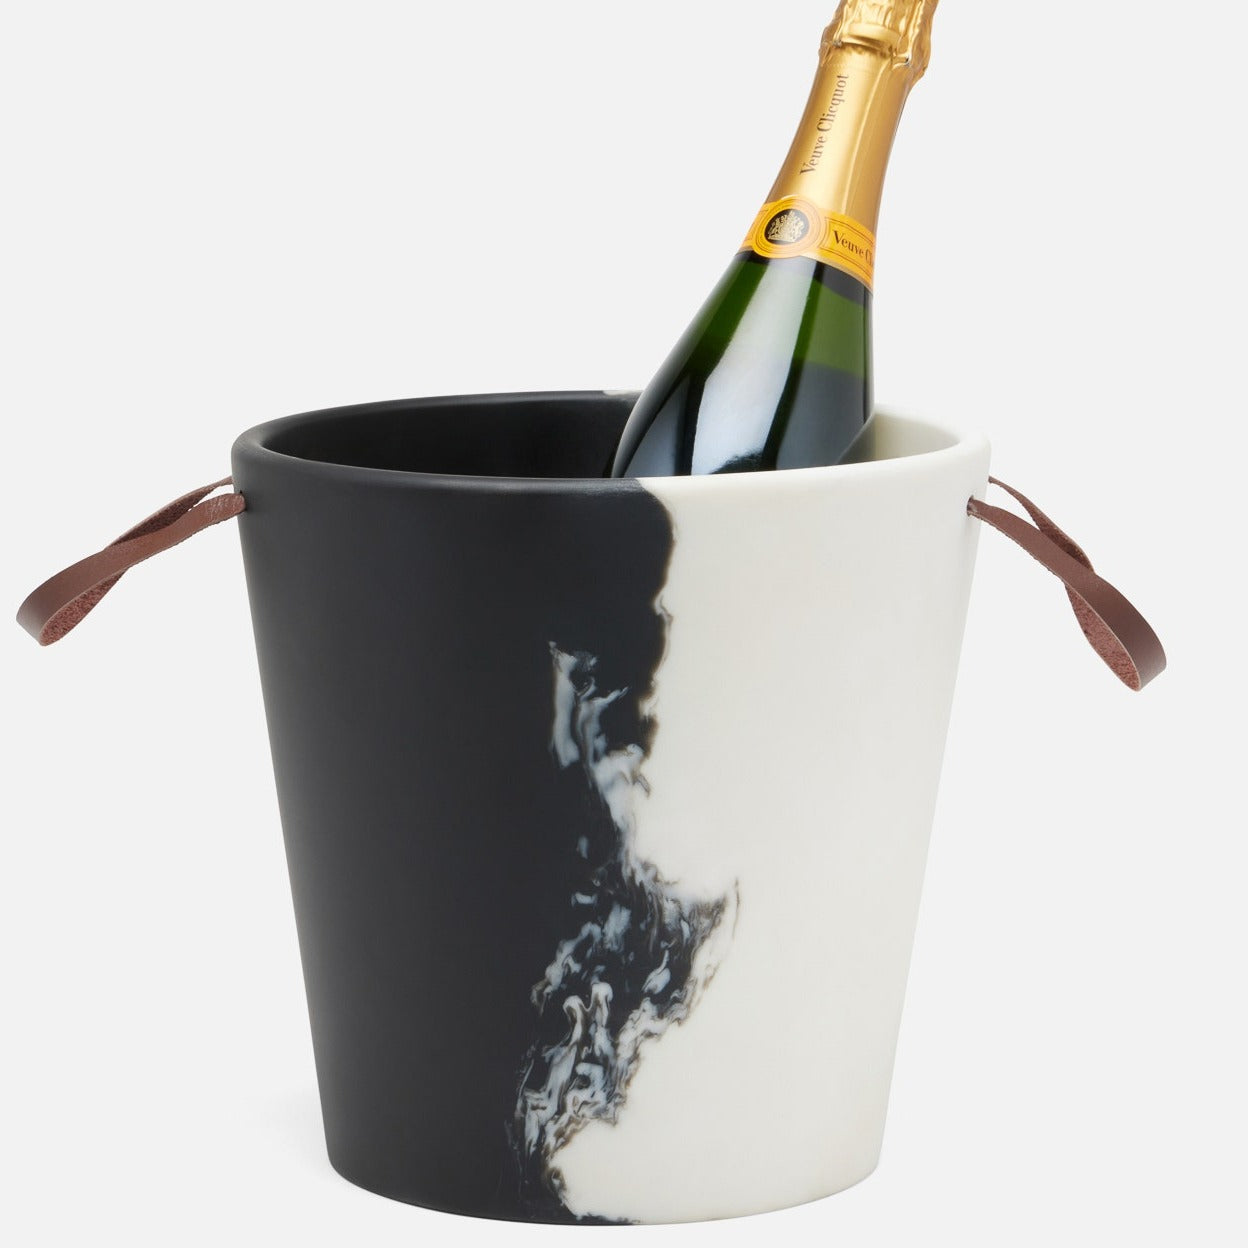 blue pheasant maxton champagne bucket styled